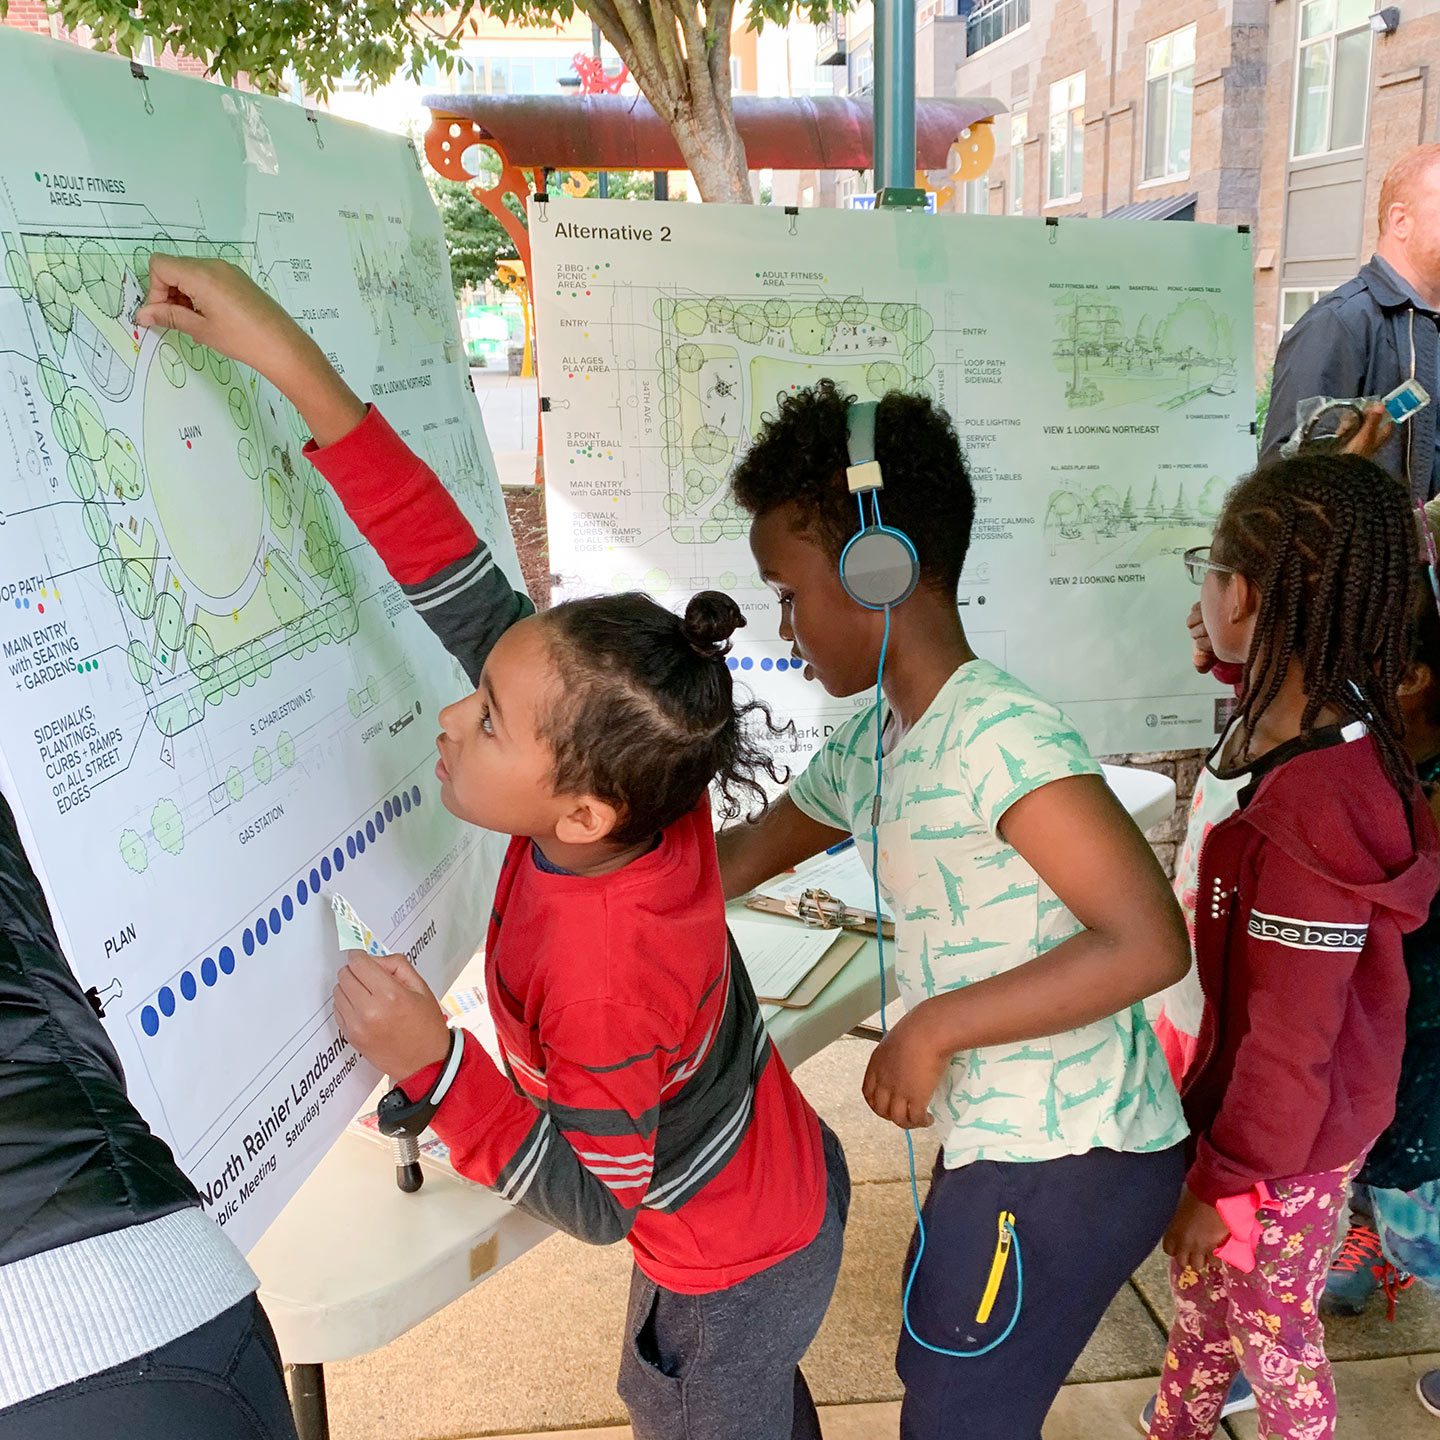 Three older kids interacting with poster plans of a new park